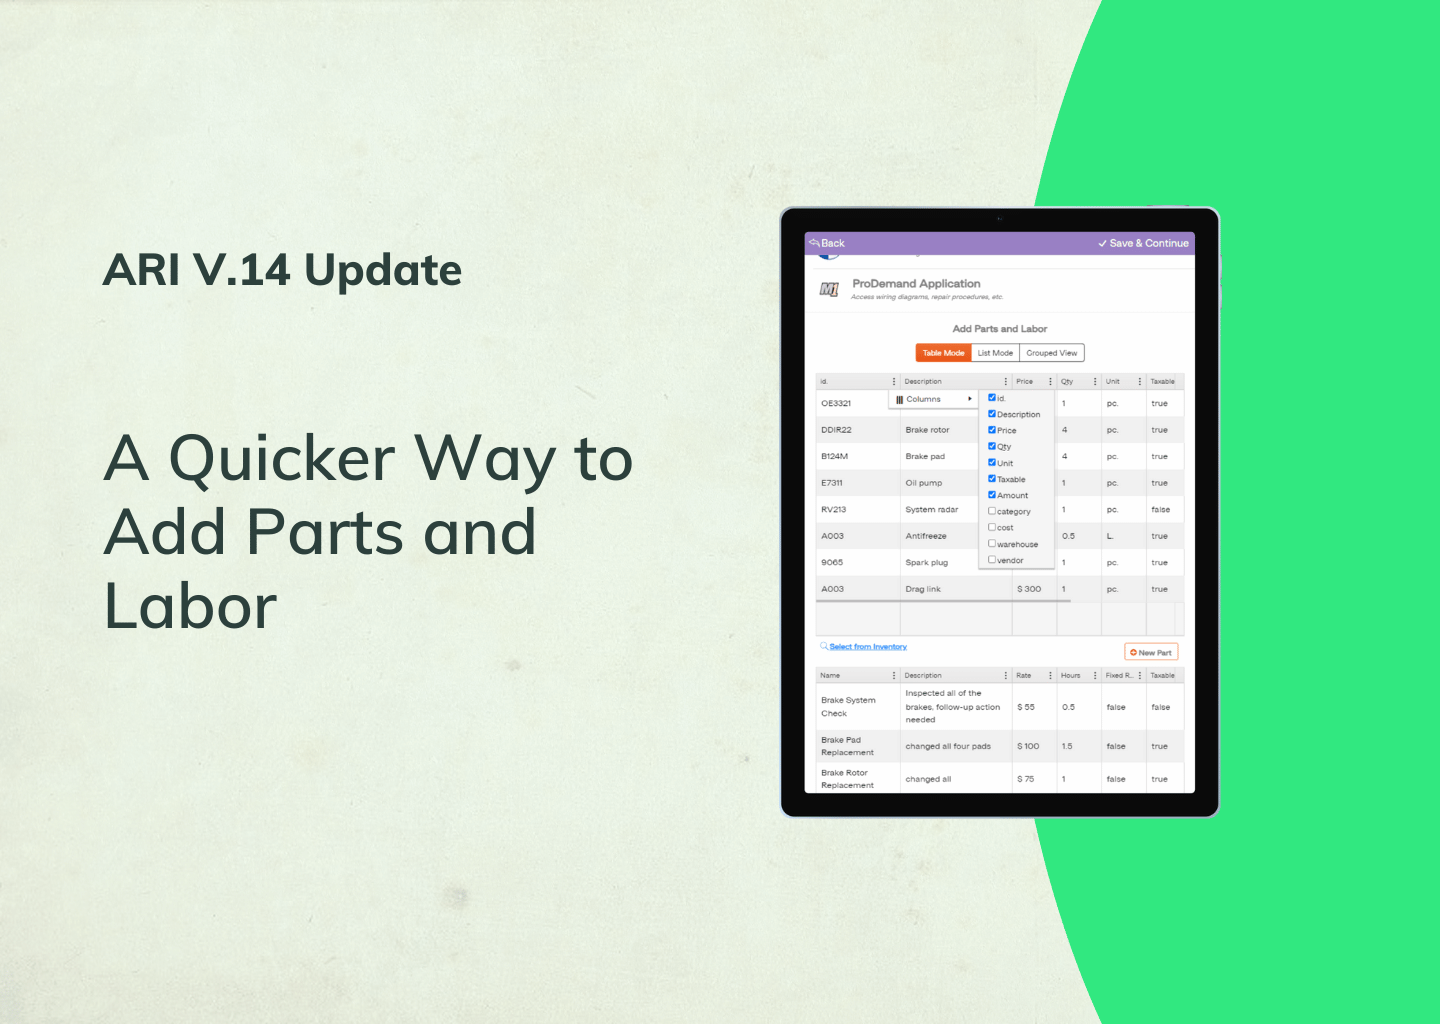 A Quicker Way to Add Parts And Labor | New Invoice Input Options in ARI v.14